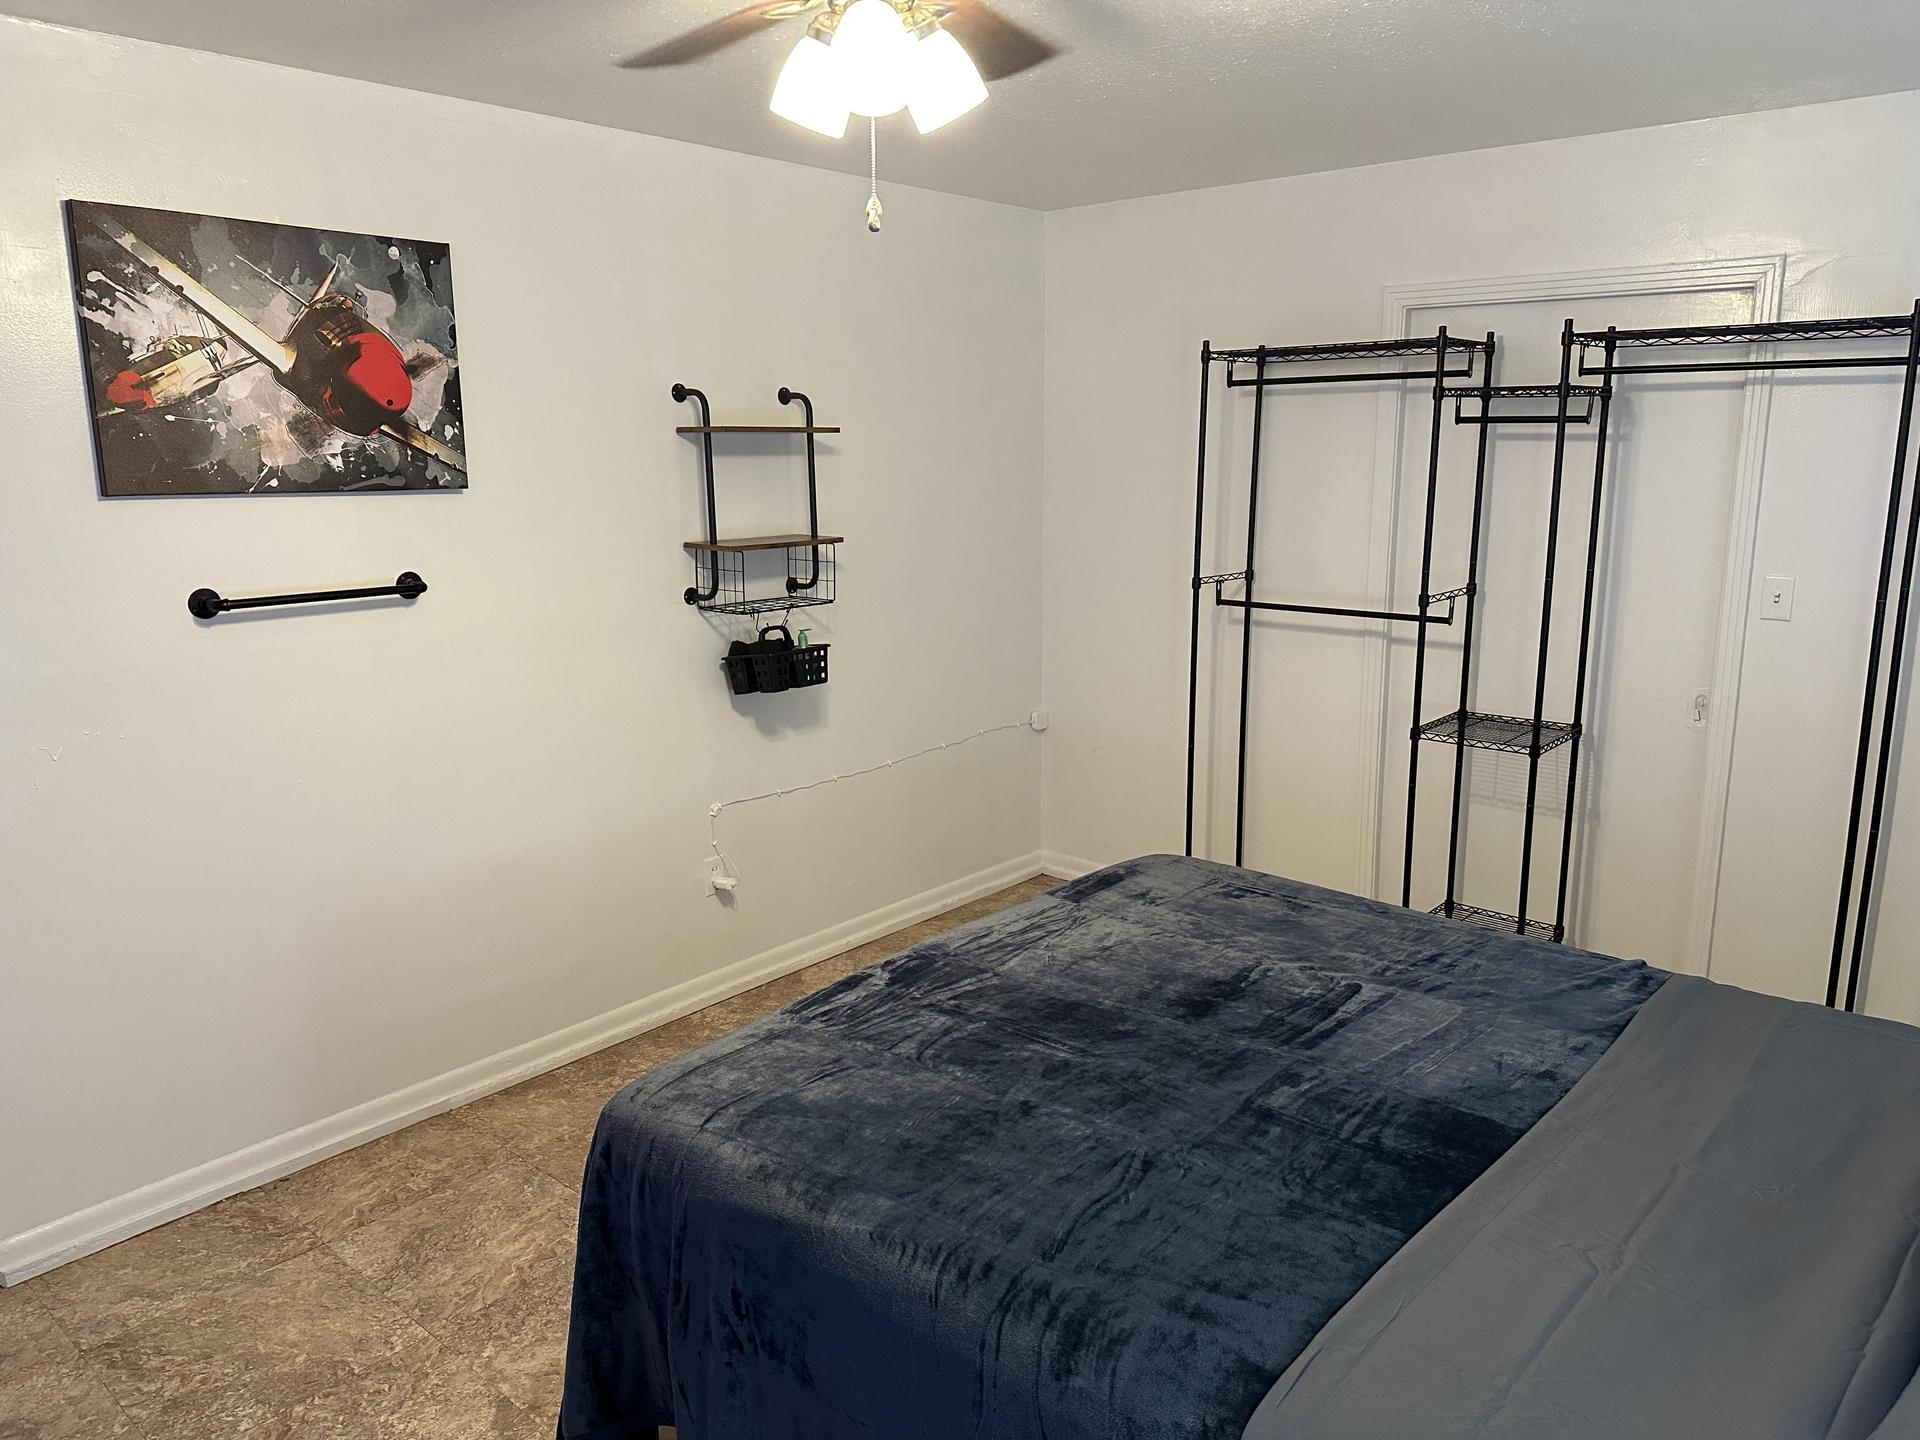 All rooms have a Towel Bar, Coat Hooks, Display Shelf, Artwork, and More!